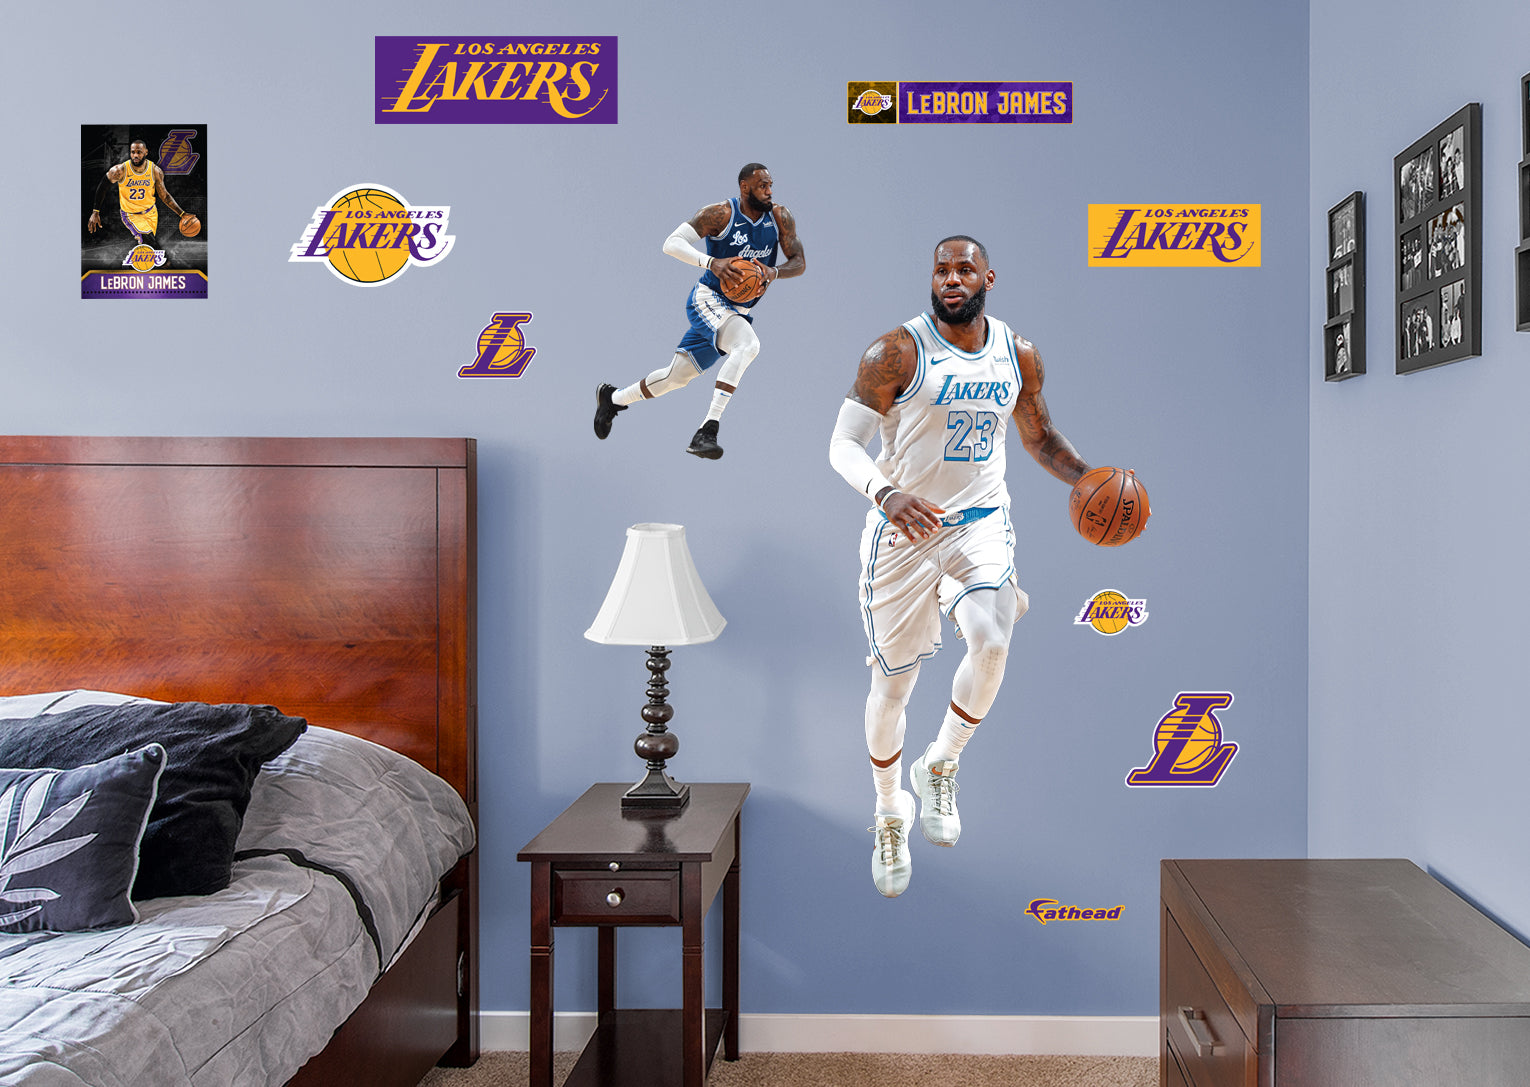 LeBron James 2021 City Jersey for Los Angeles Lakers - Officially Licensed NBA Removable Wall Decal Life-Size Athlete + 10 Decal